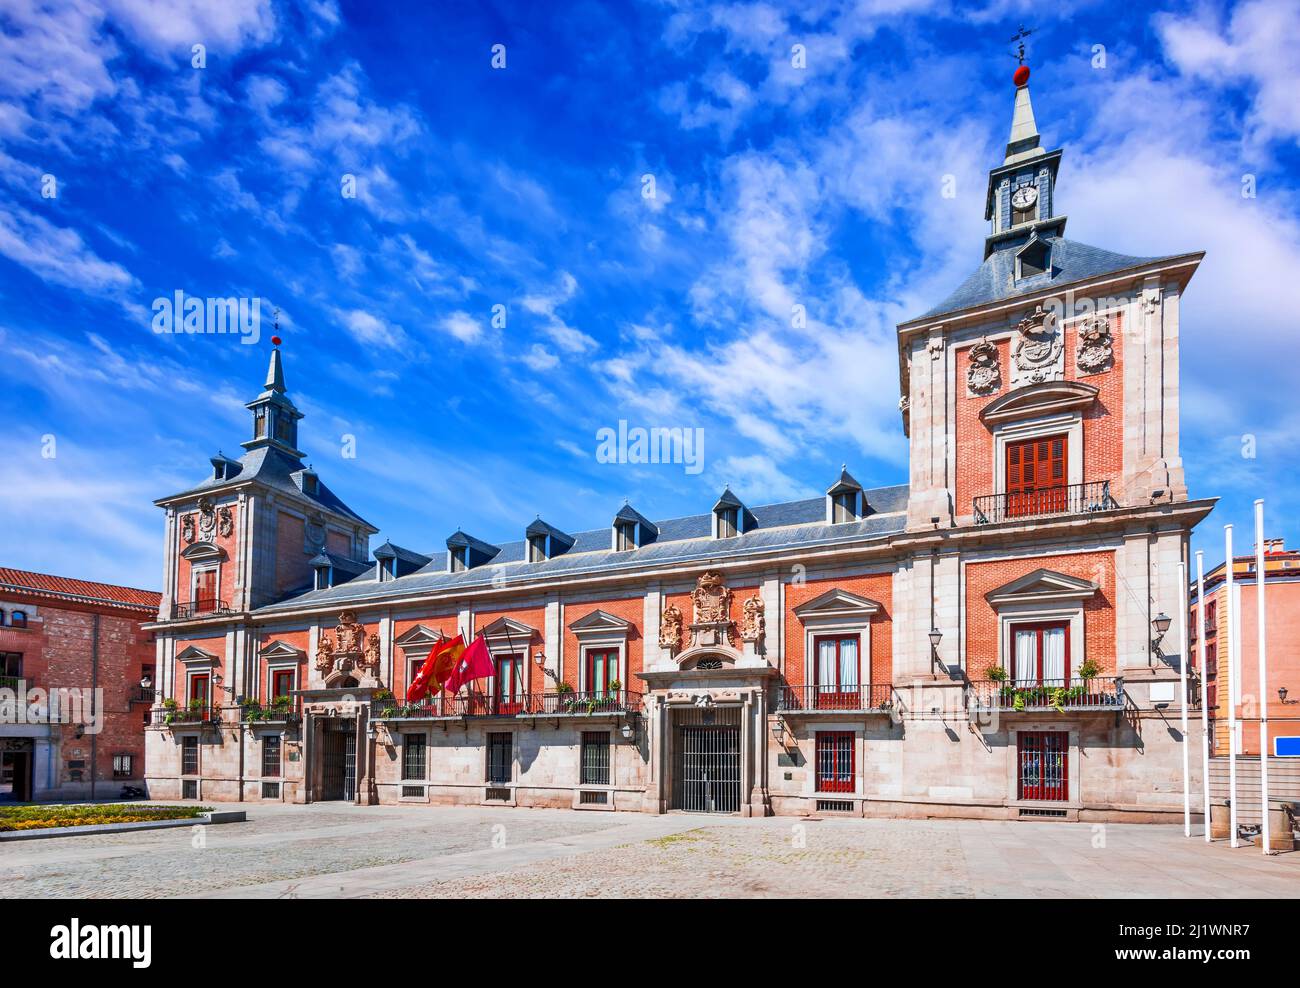 Madrid, Spain. Plaza de La Villa in the old town of Madrid, the oldest civil square dating back to 15th century. Stock Photo